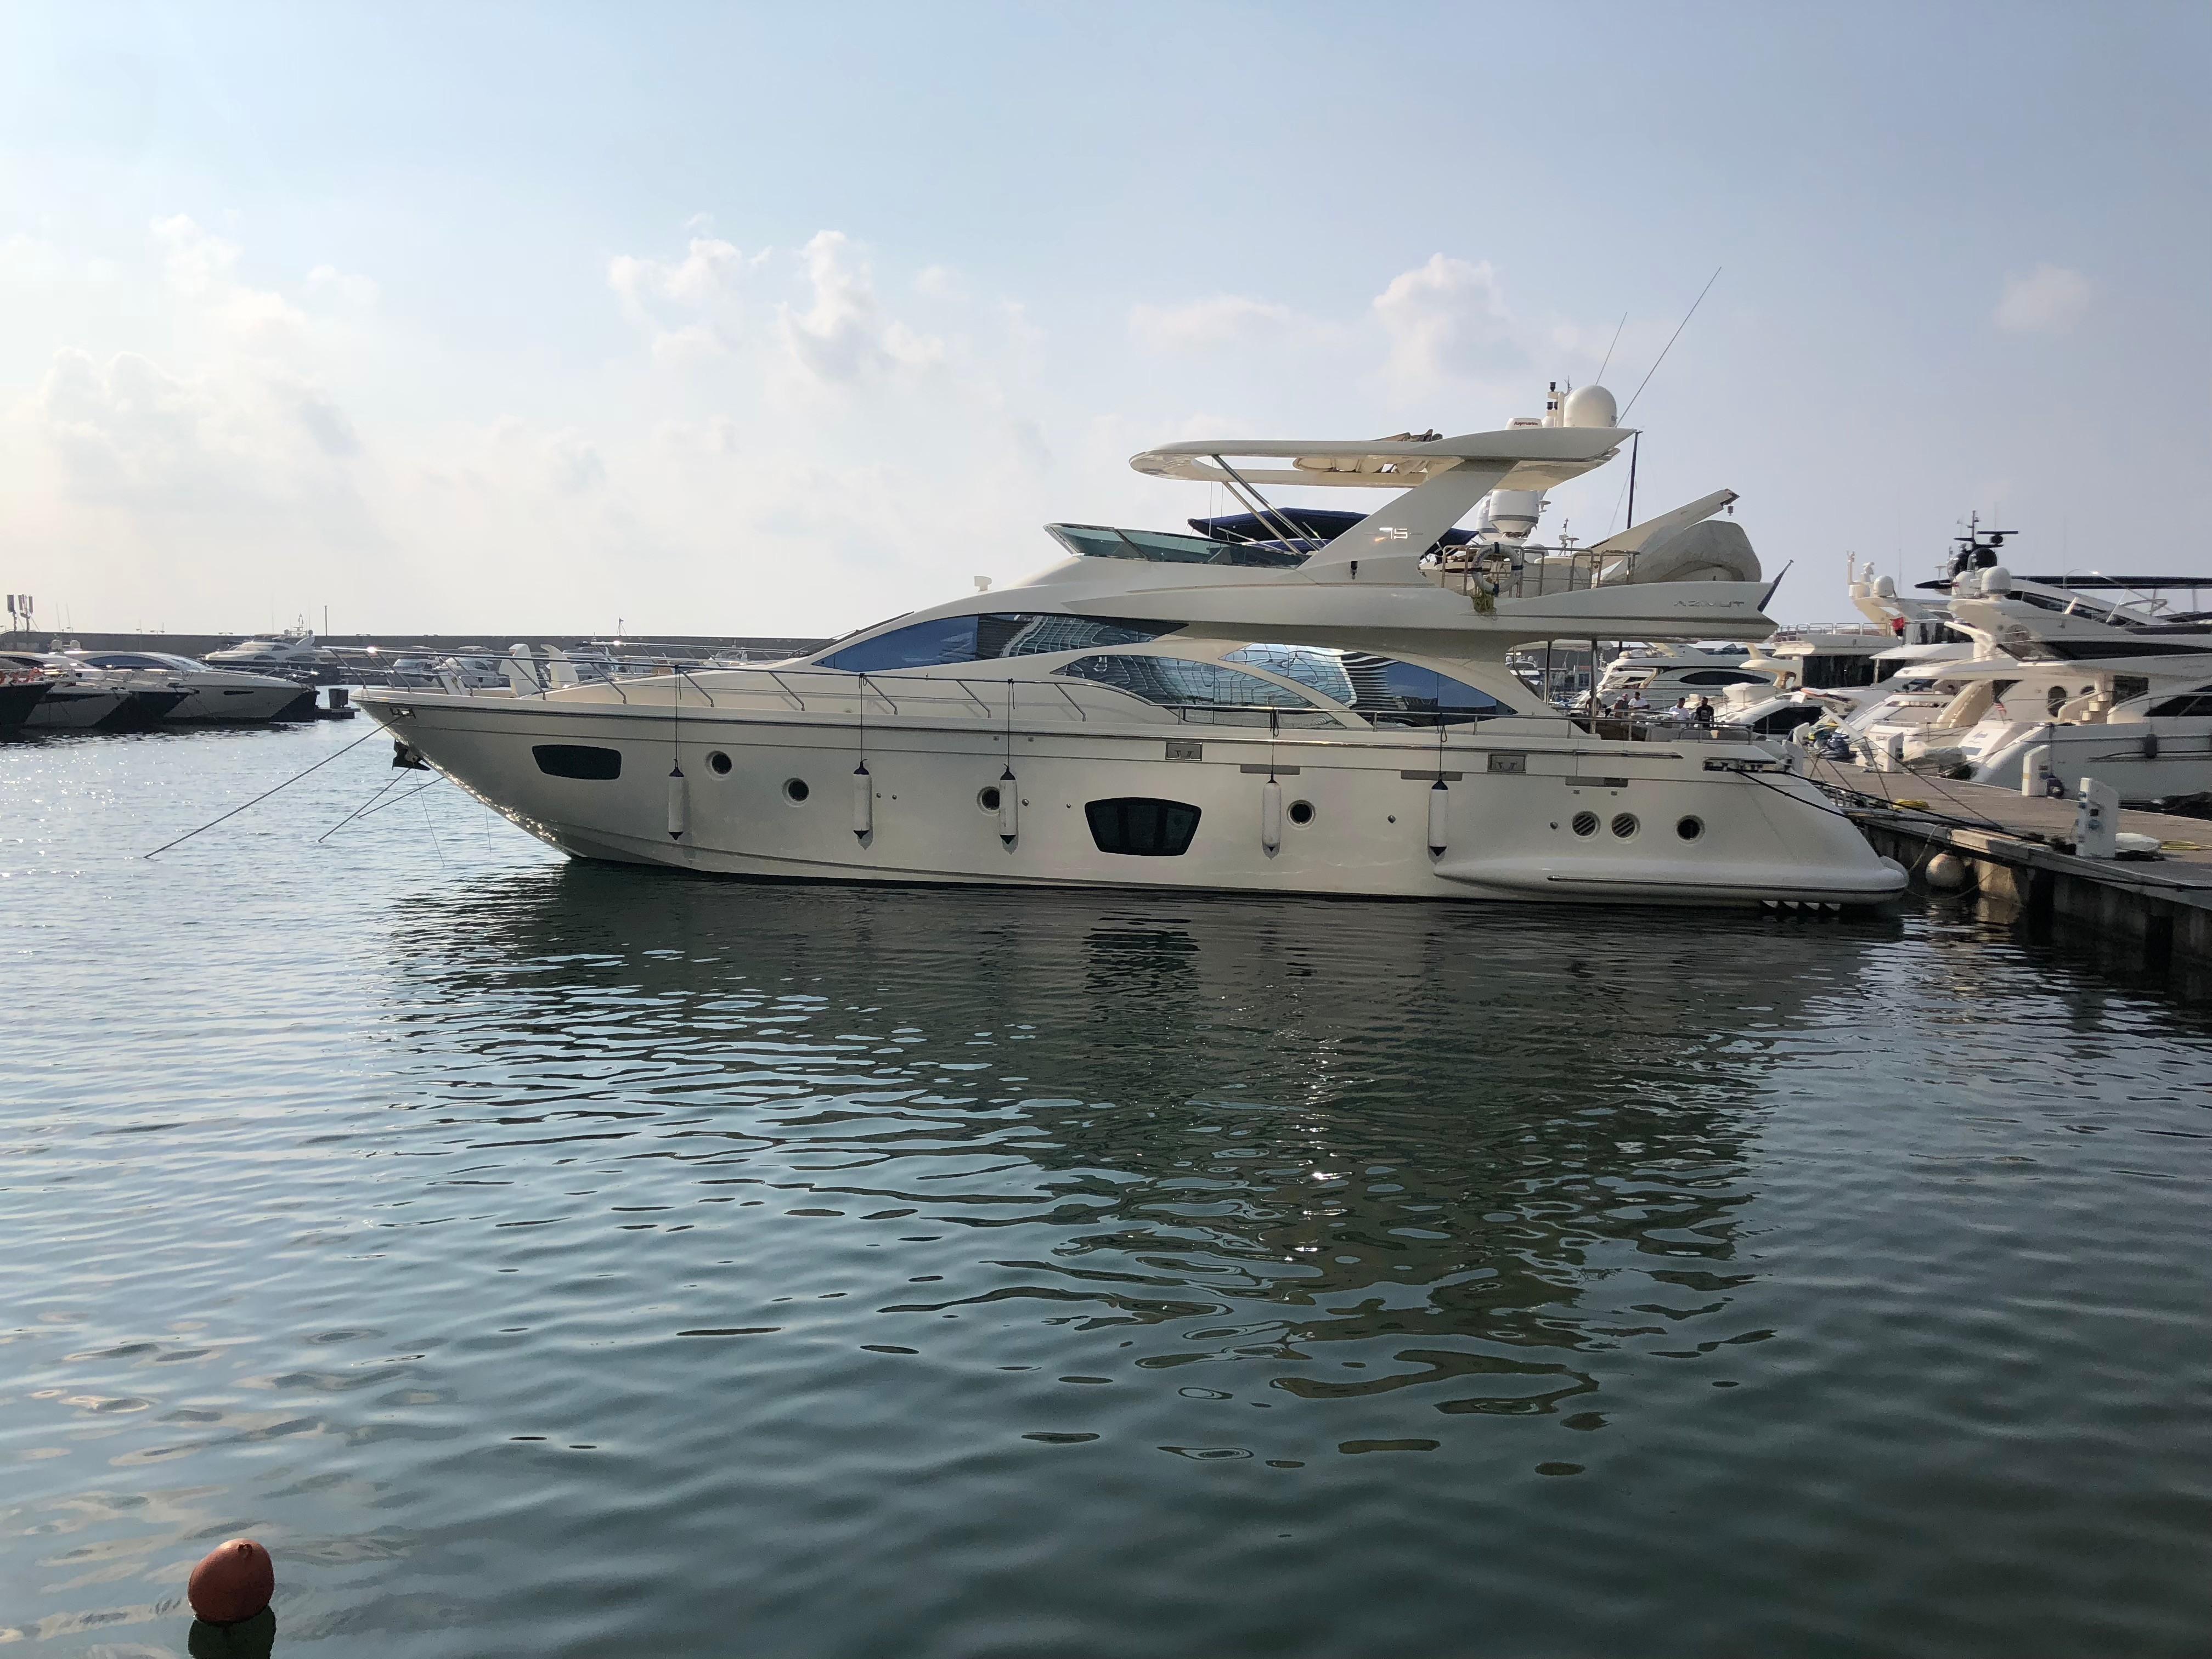 yachting services lebanon